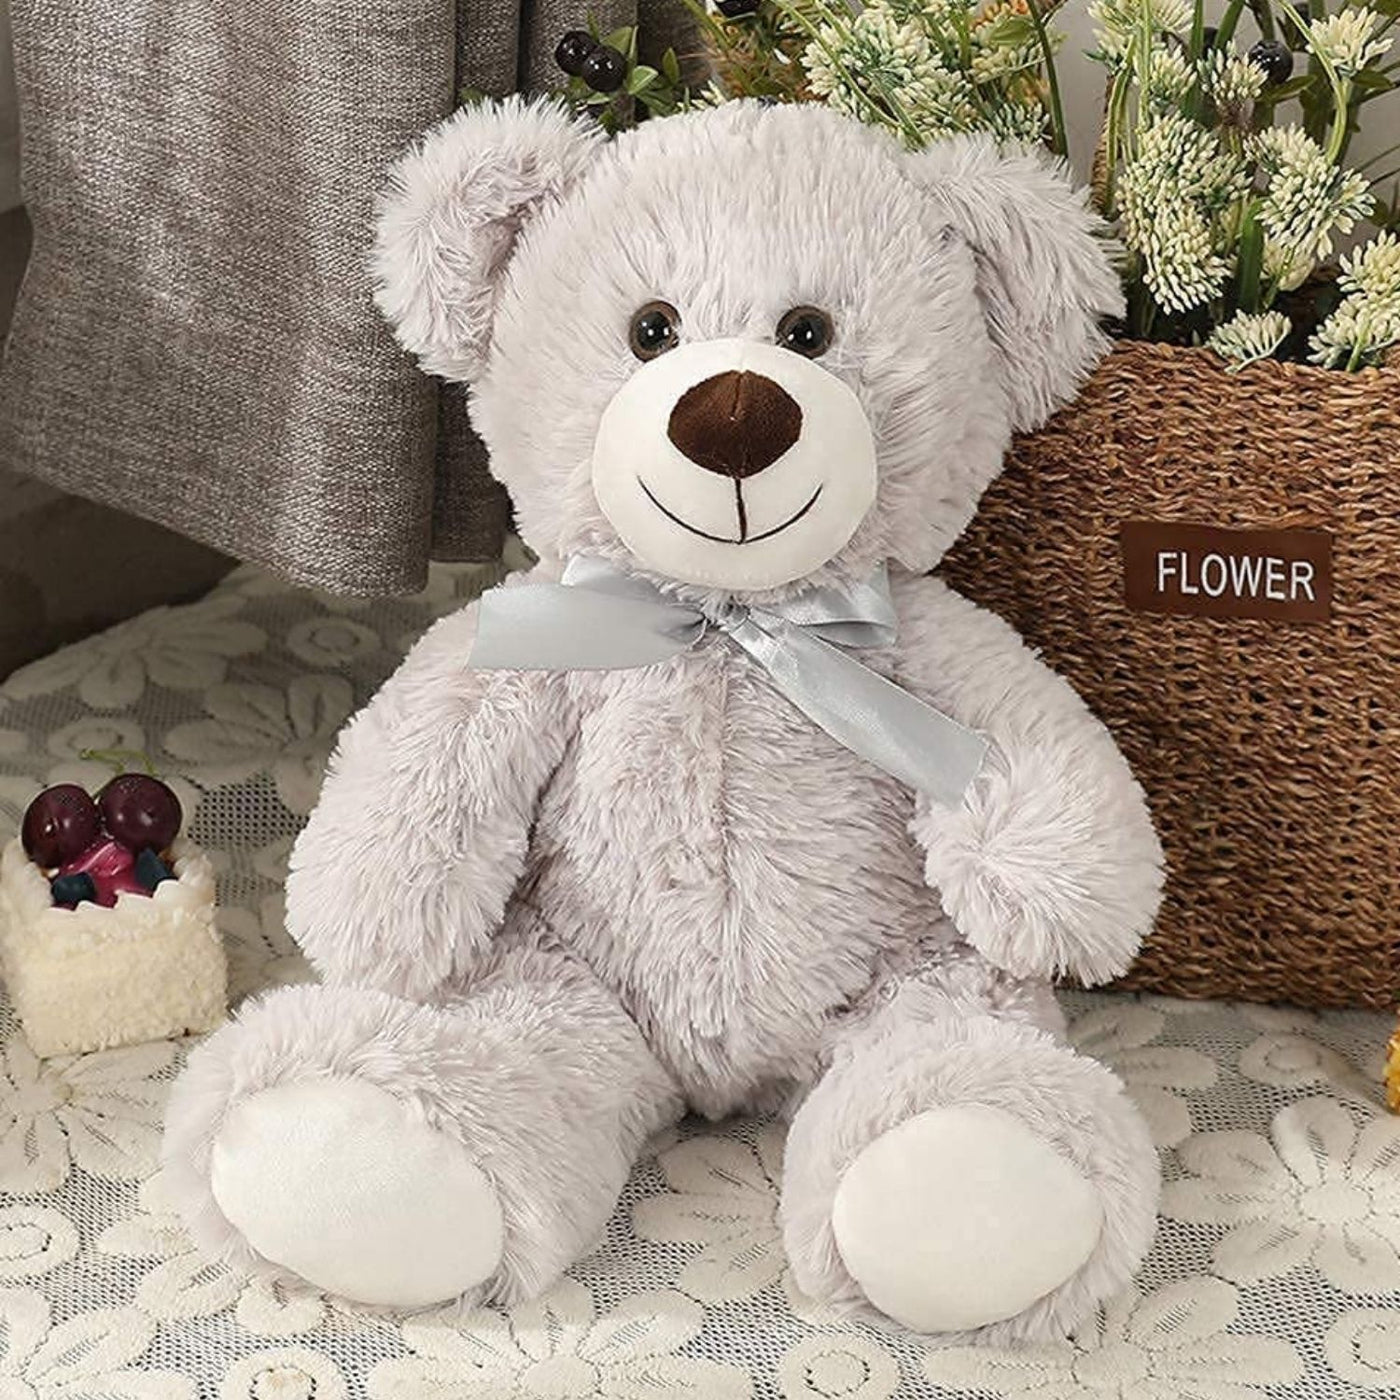 3-Pack Teddy Bear Stuffed Toy Set, White/Grey/Light Brown, 13.8 Inches